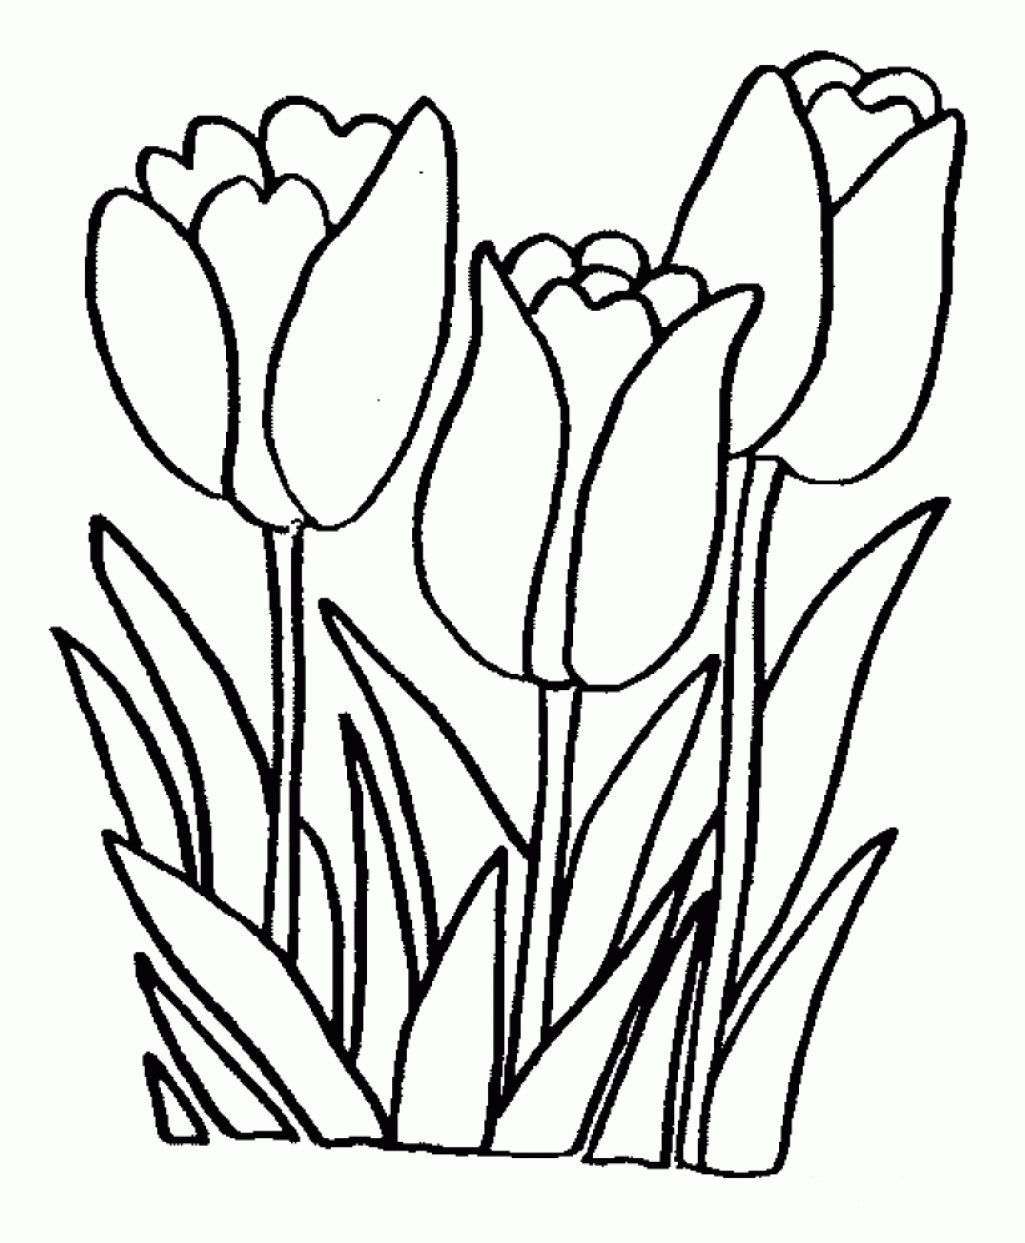 Flower Coloring Pages For Girls
 Coloring Pages Flower Coloring Pages For Girls And